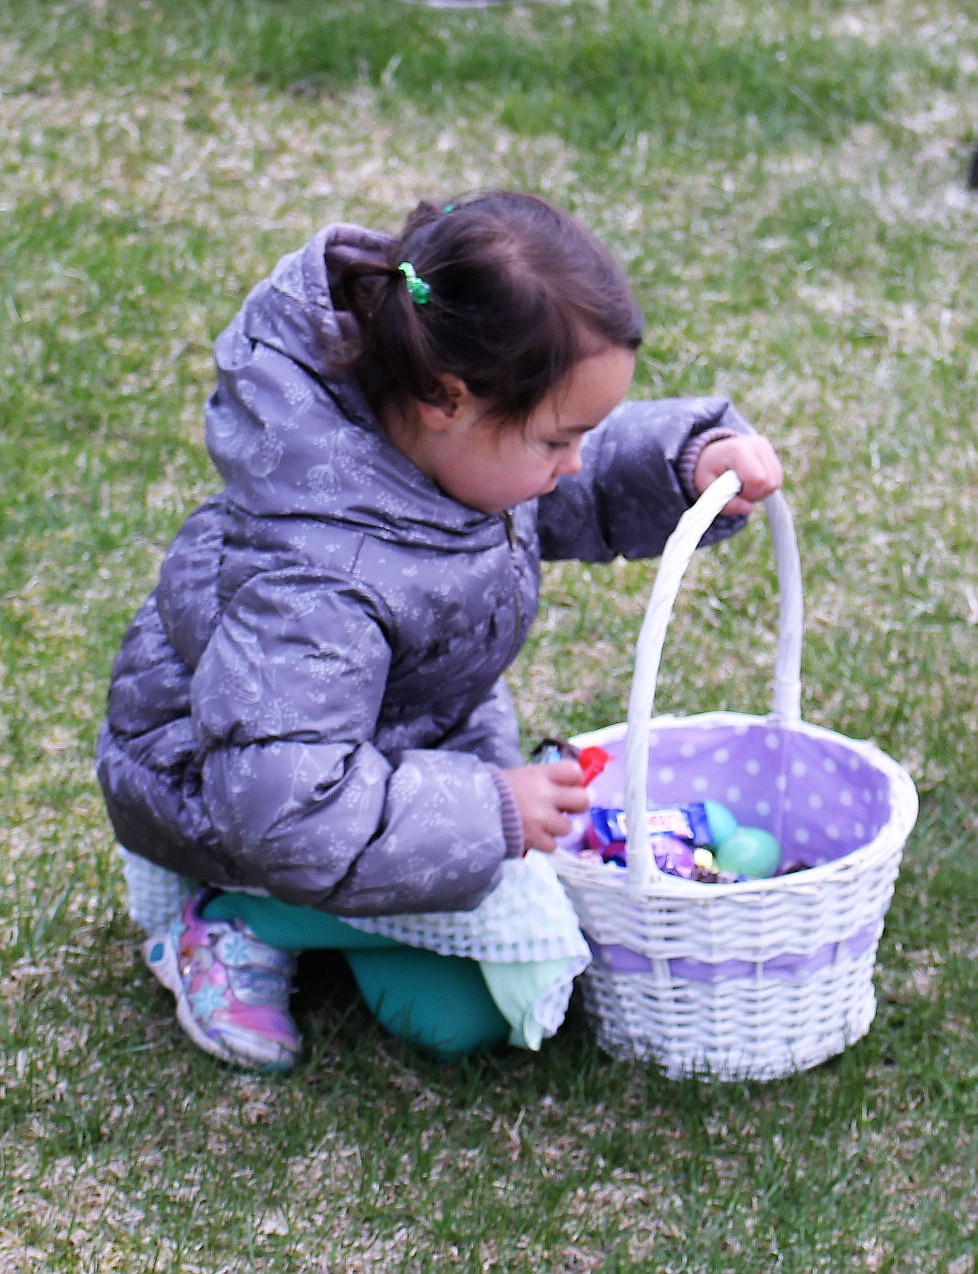 A preschool girls cautiously picks up candy and eggs and puts them into her basket. (Kathleen Woodford/Mineral Independent).